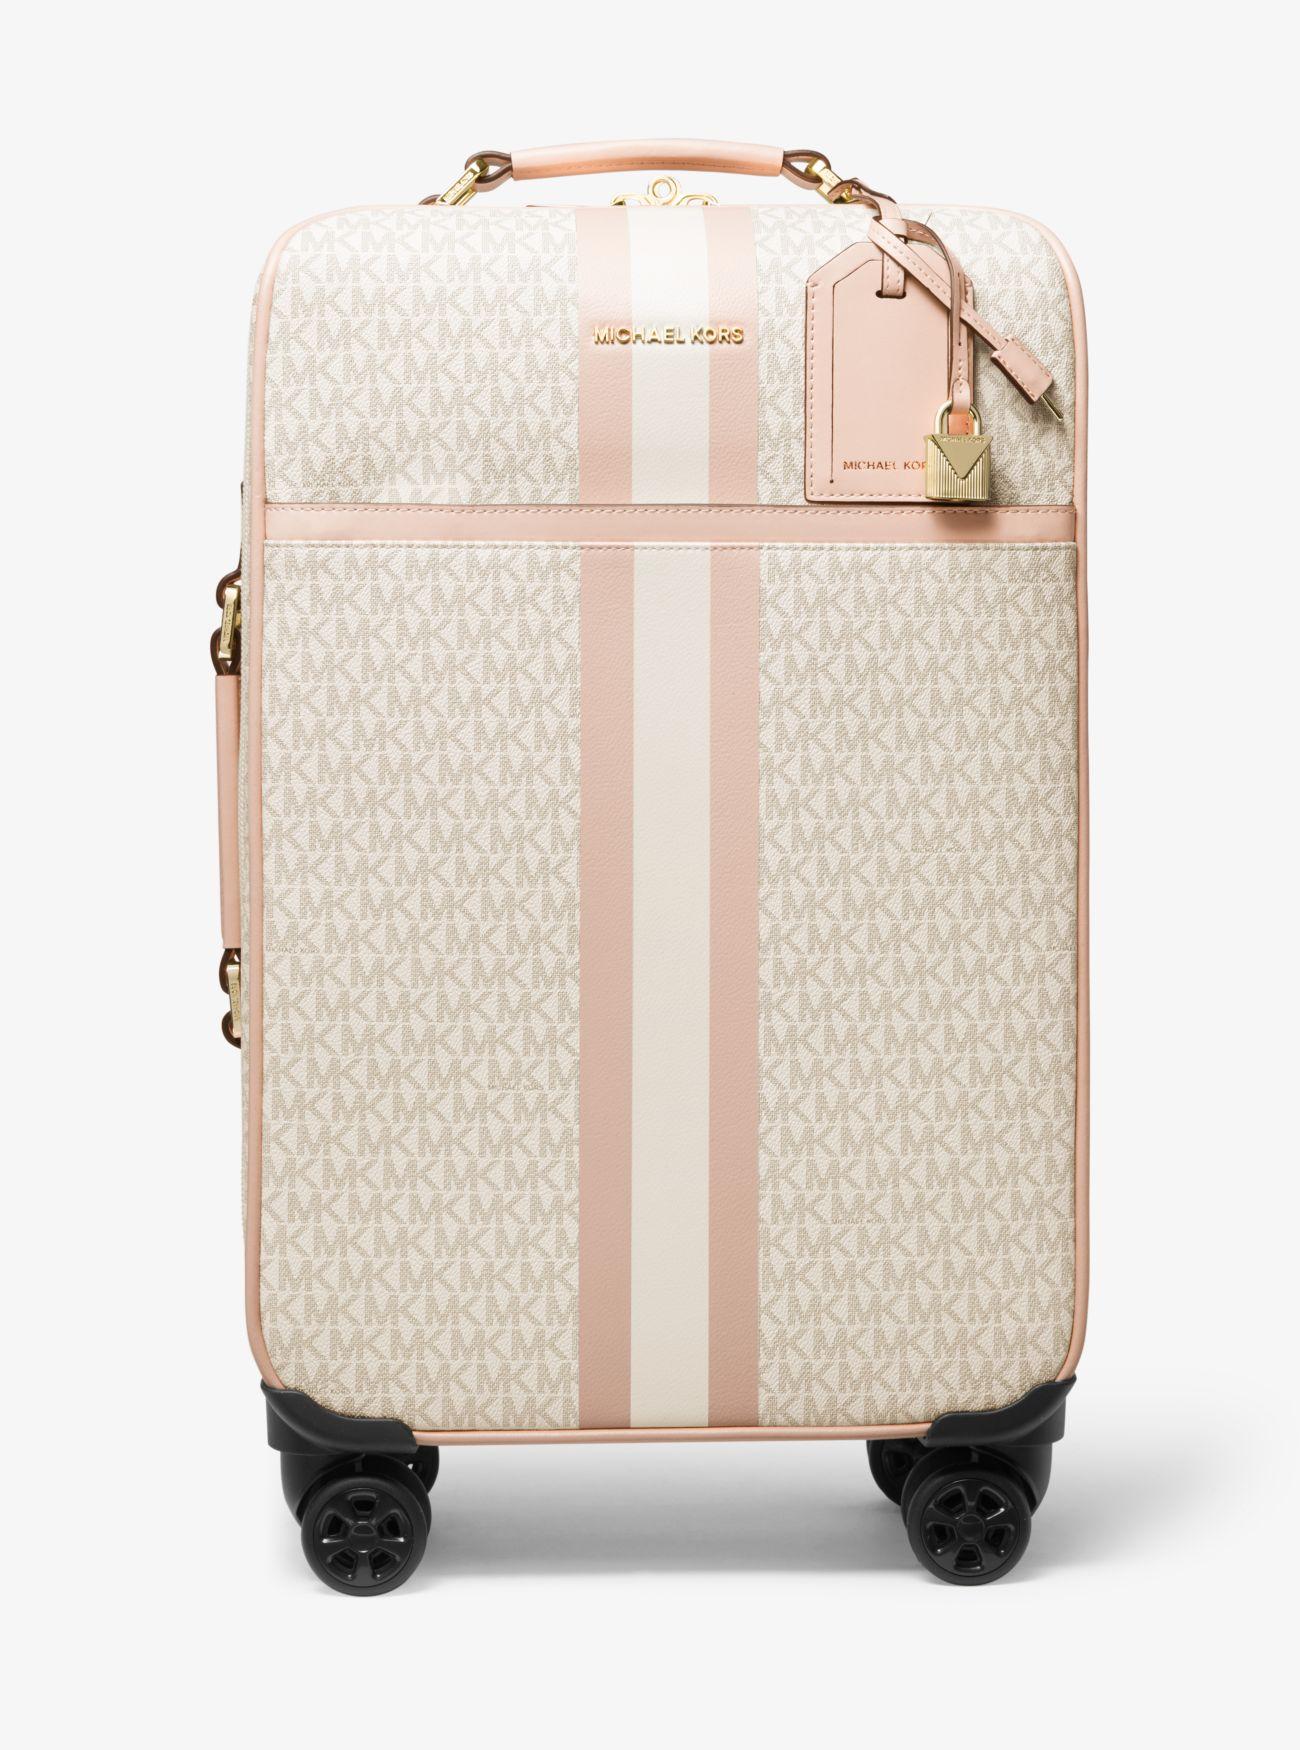 michael kors carry on suitcase